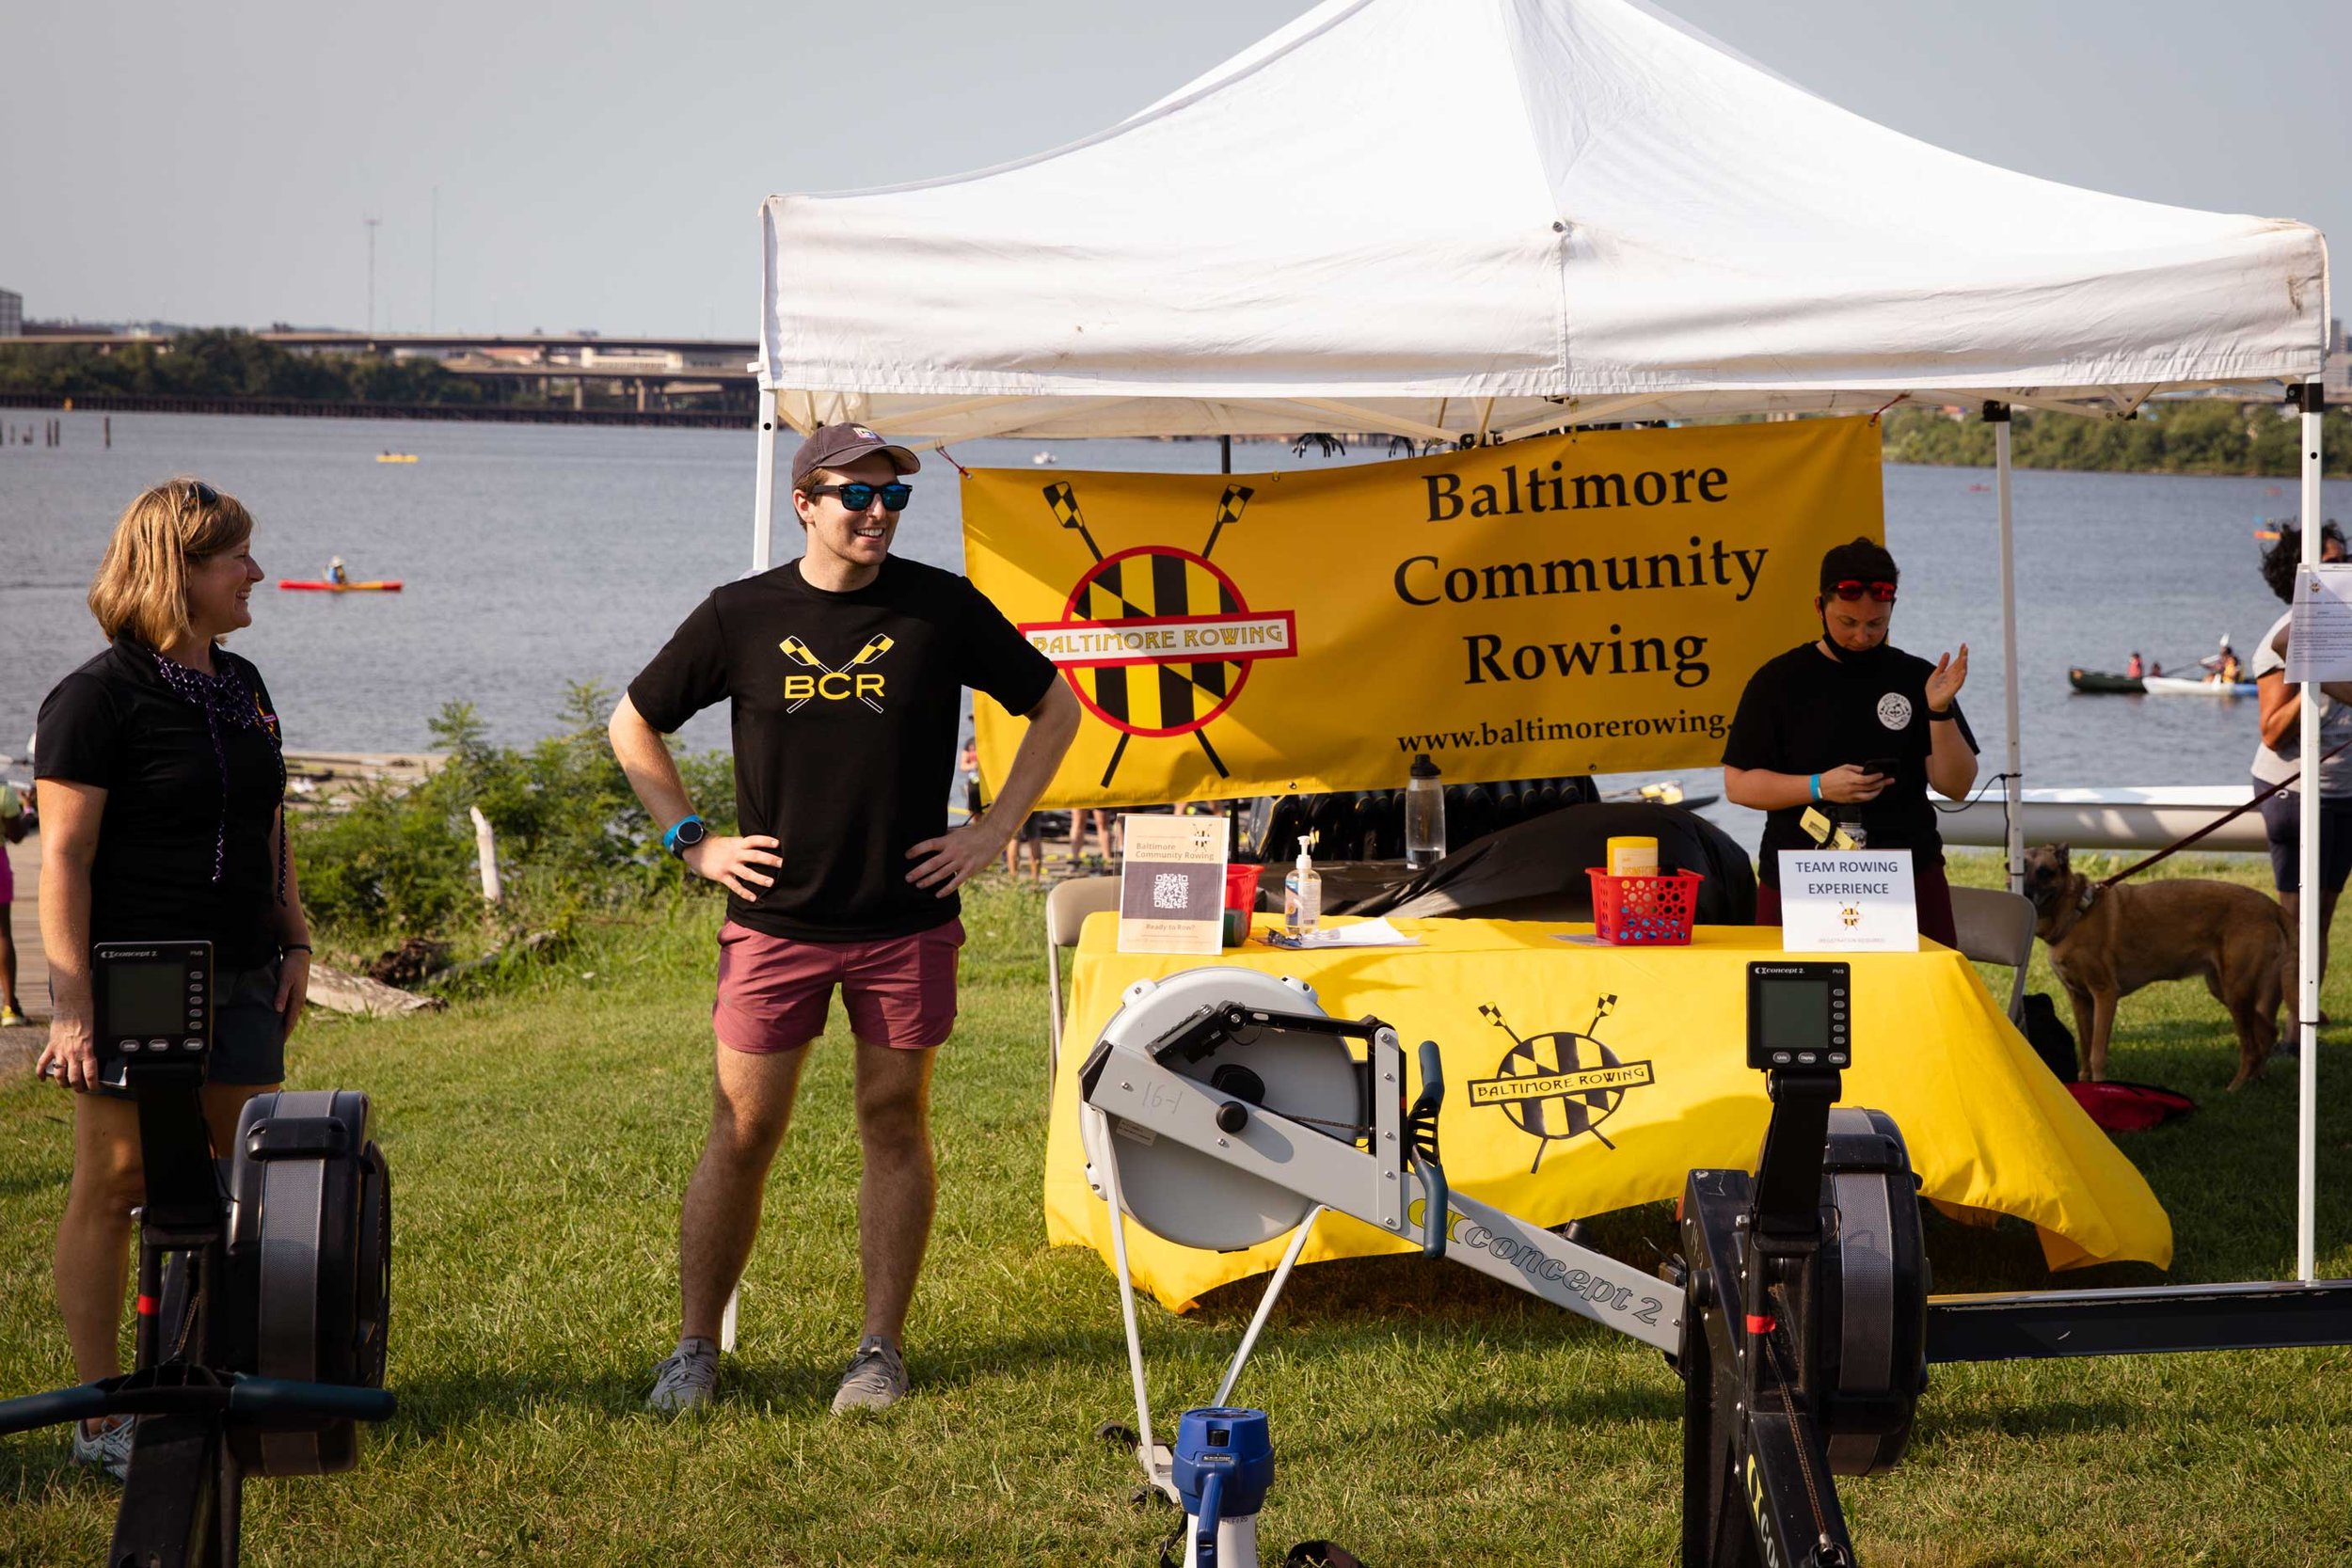  Baltimore Community Rowing tent 